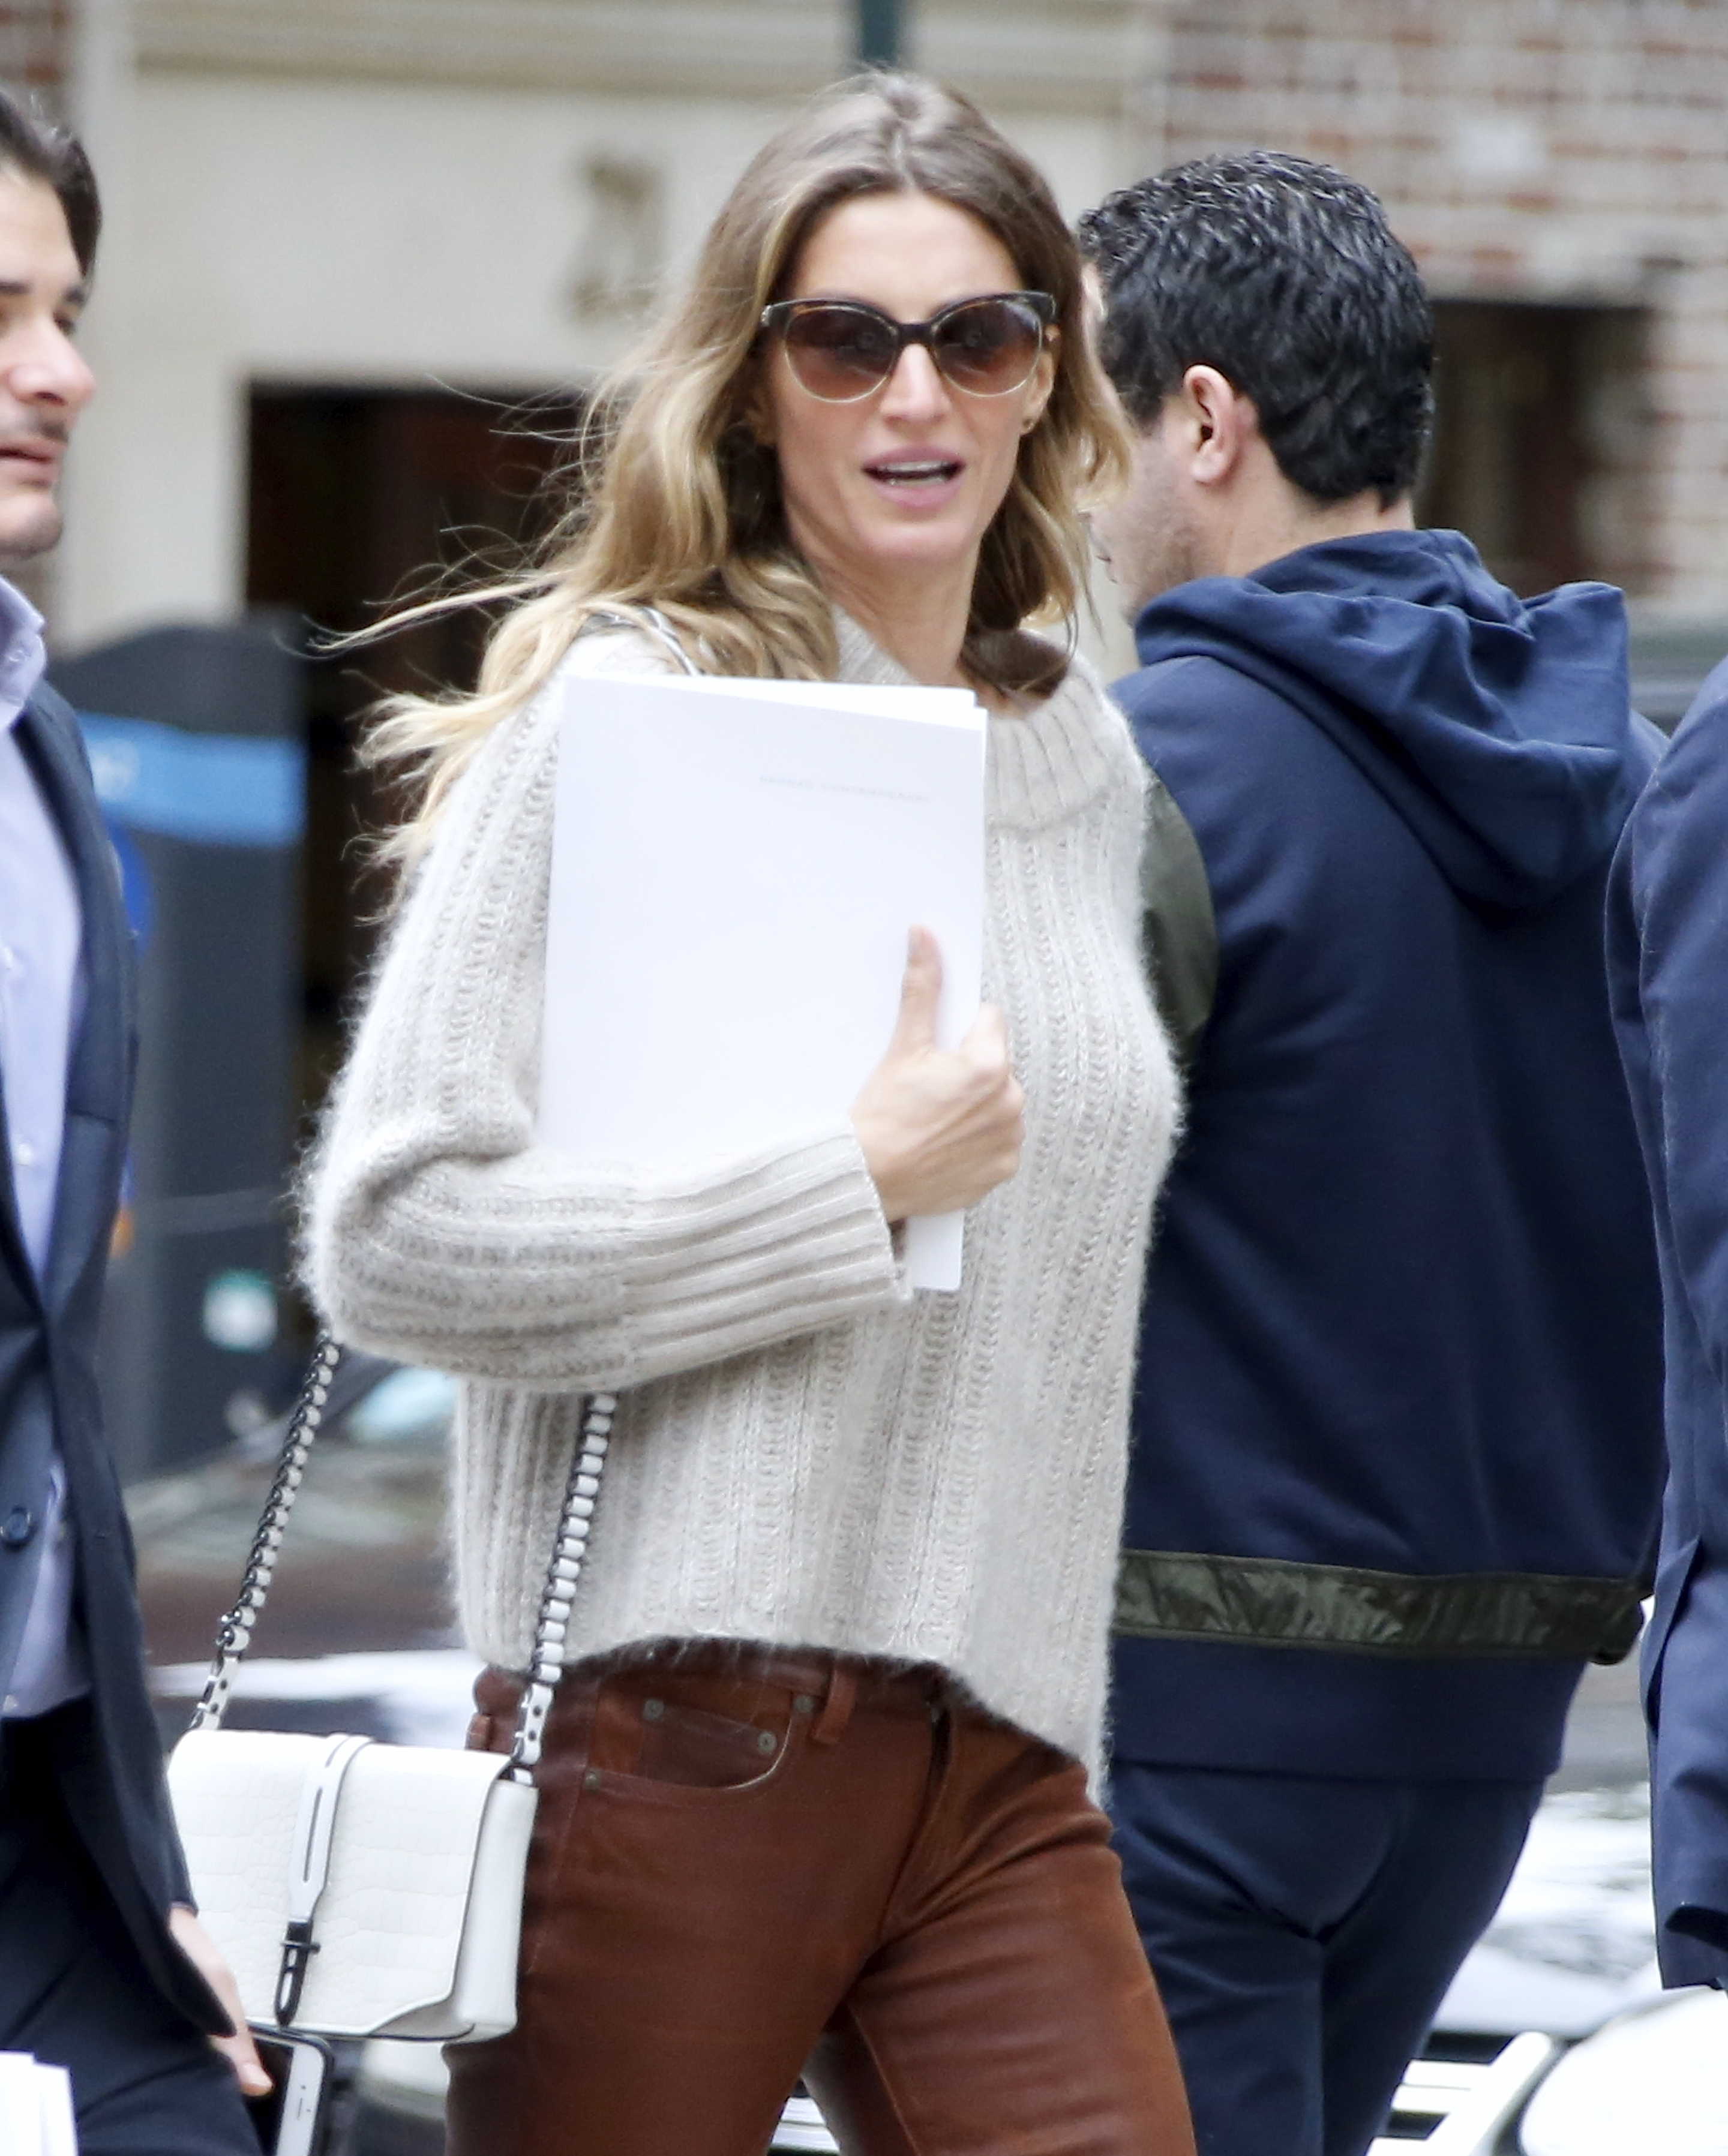 Gisele Bundchen out & about in NYC